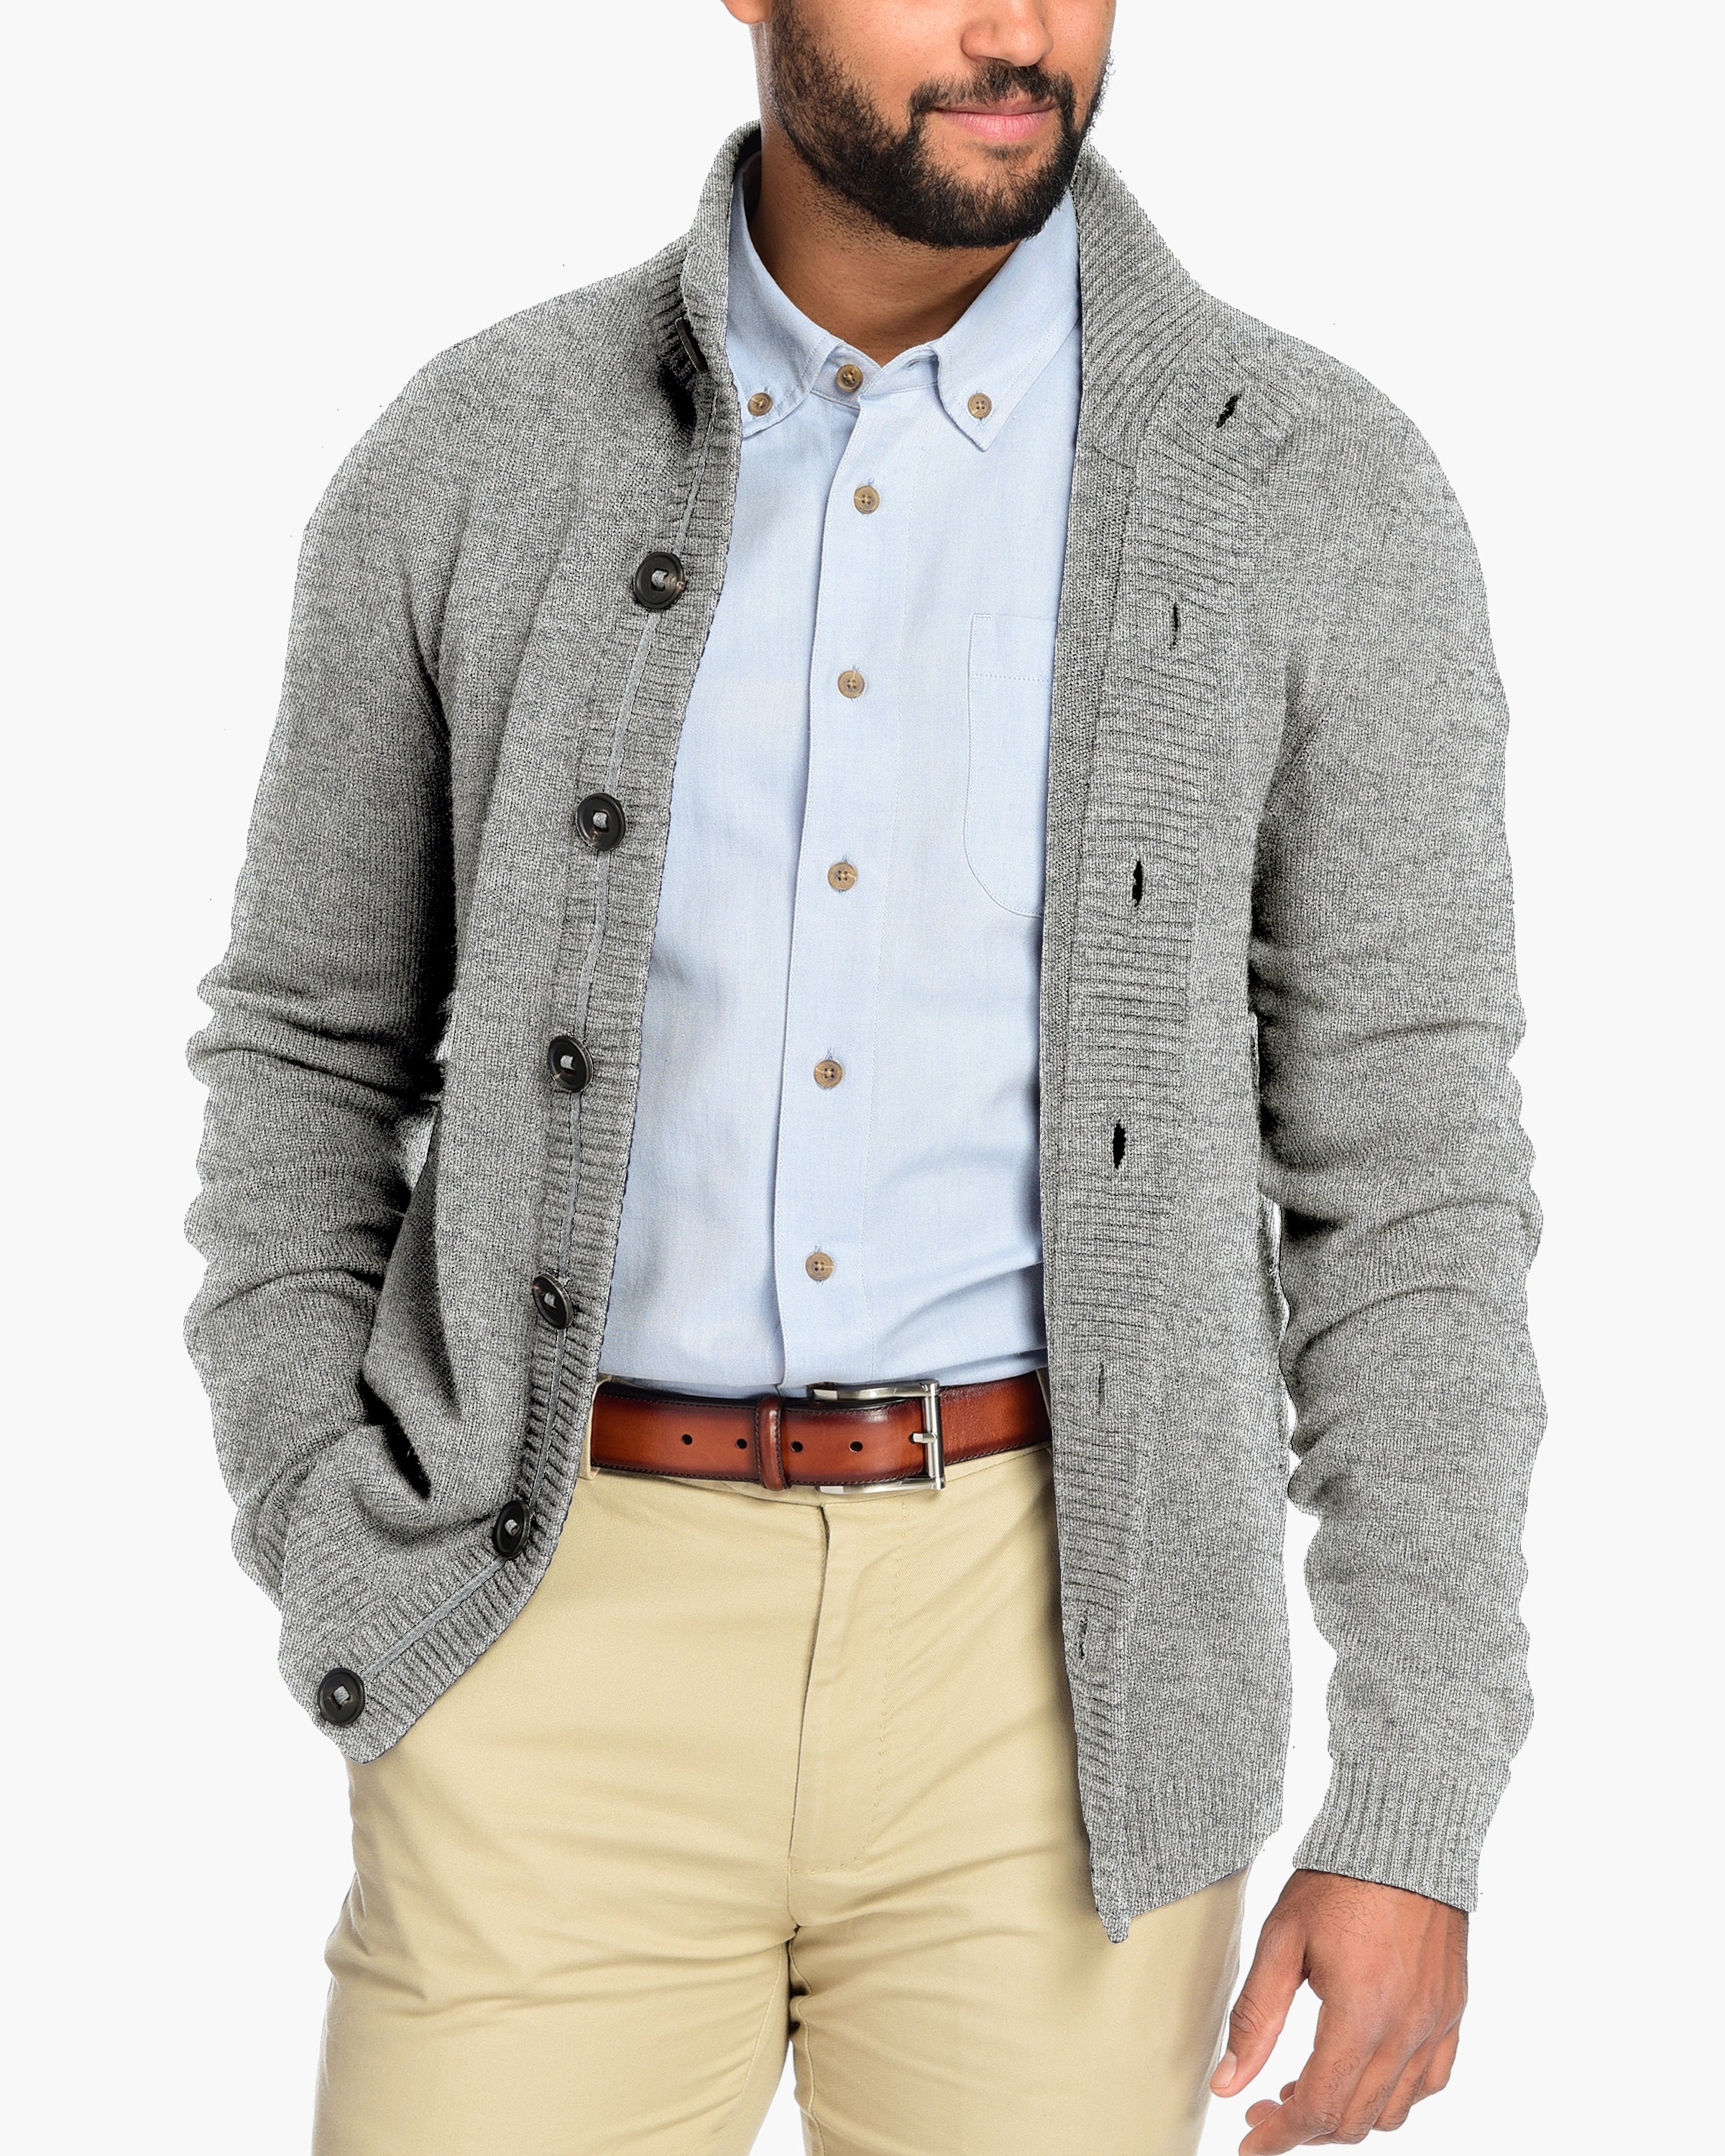 Men\'s Cardigan Sweater the Palmer Cardigan Sweater by Fisher + Baker